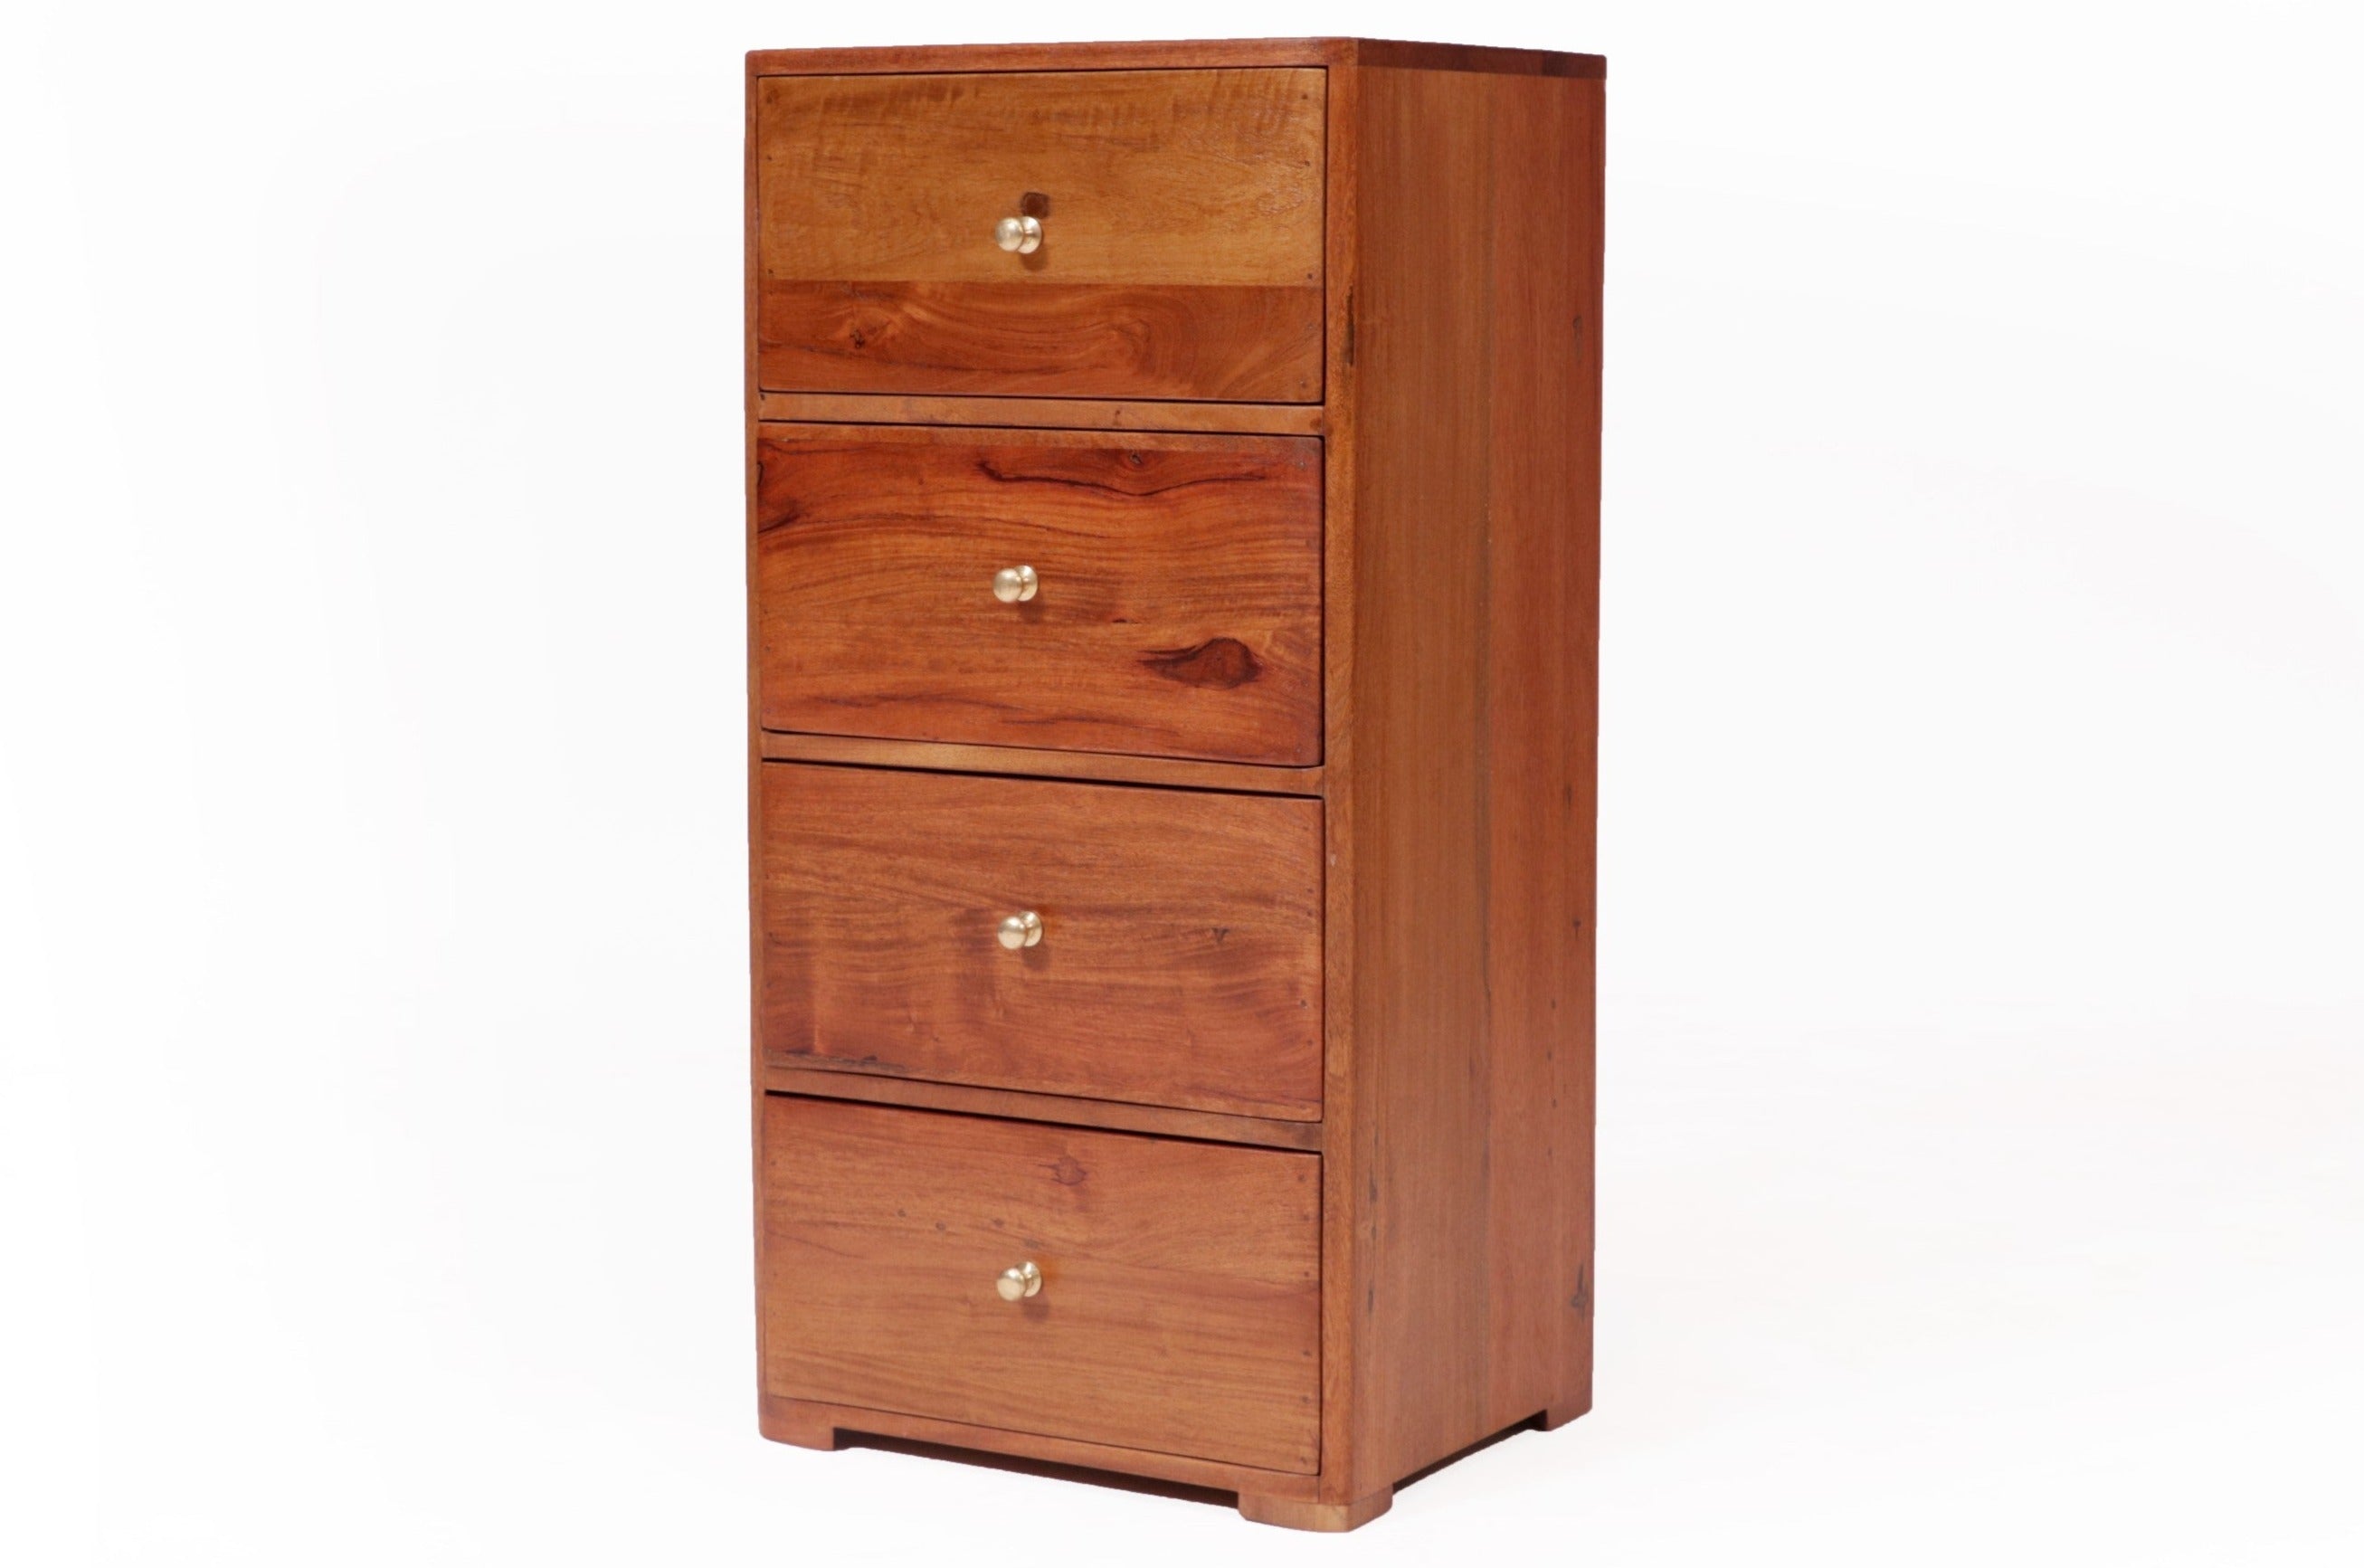 4 Drawer Tower Wooden Chest Natural Tone Natural Solid wood Drawer's Chest